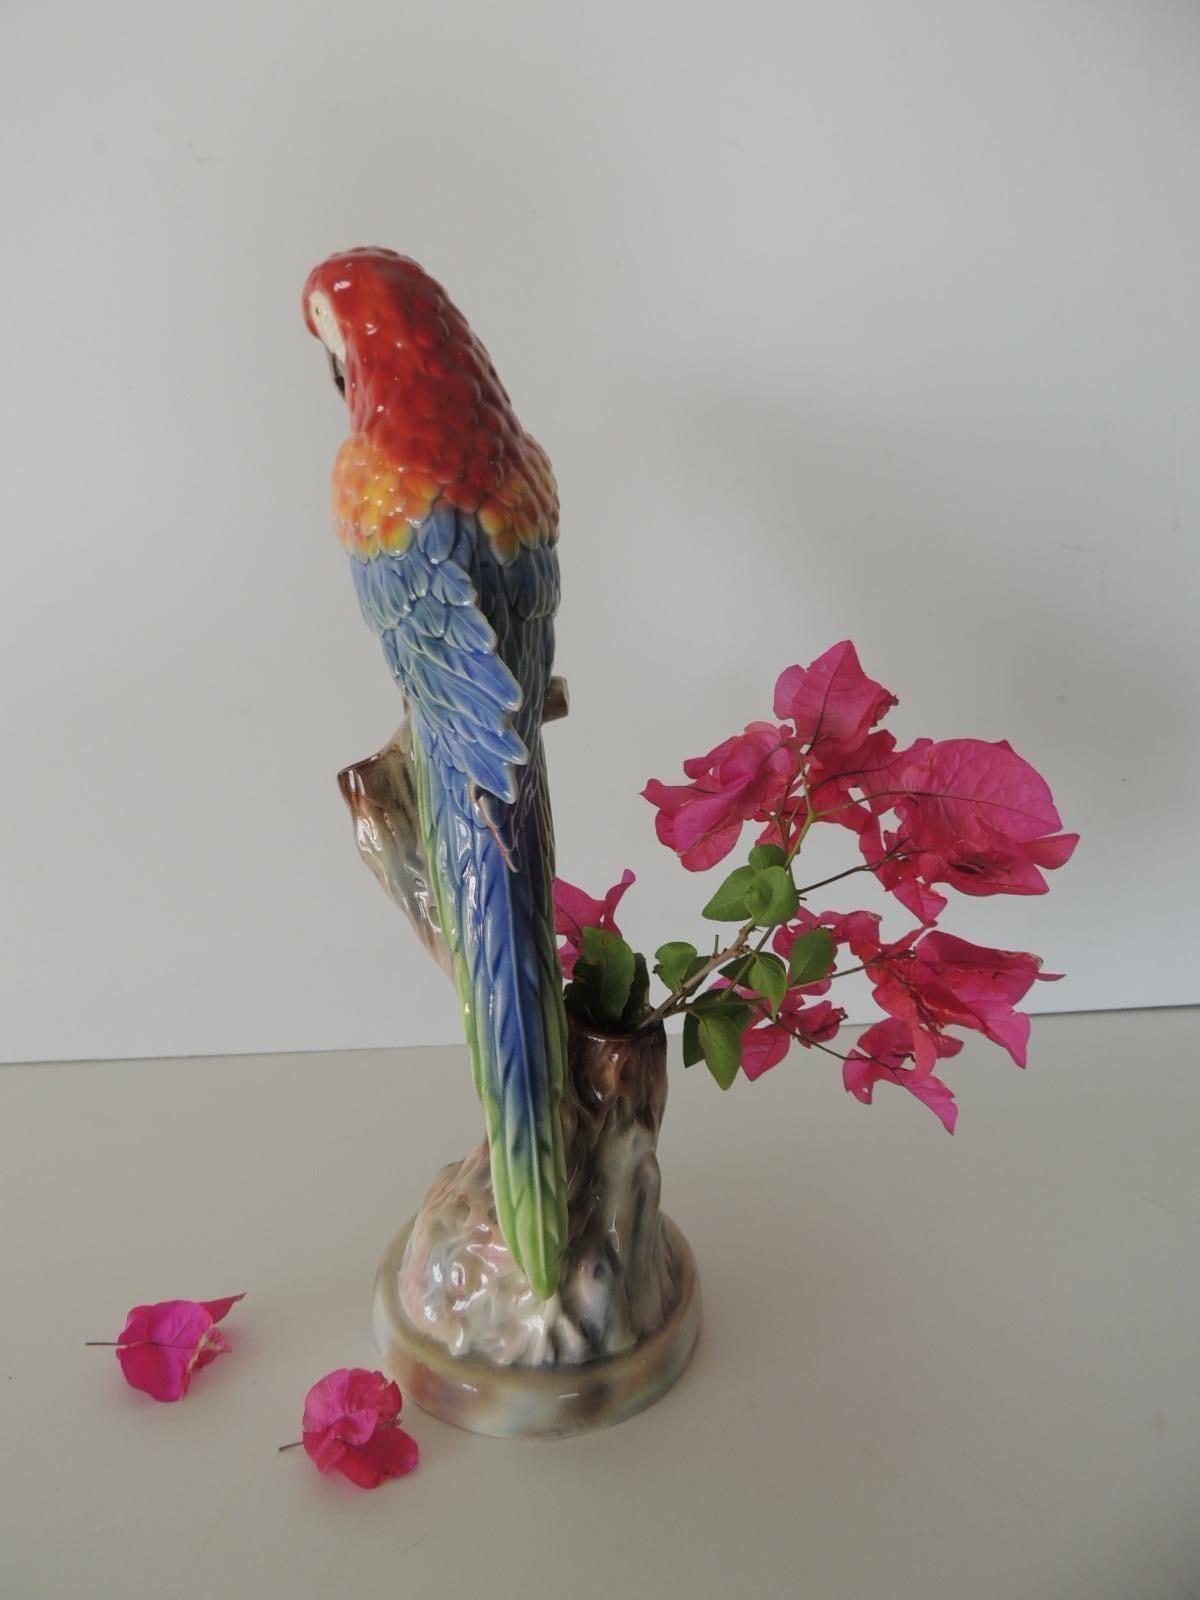 Hand-Crafted Will George California Porcelain Art Pottery Macaw Parrot Figurine Vase, 1940's